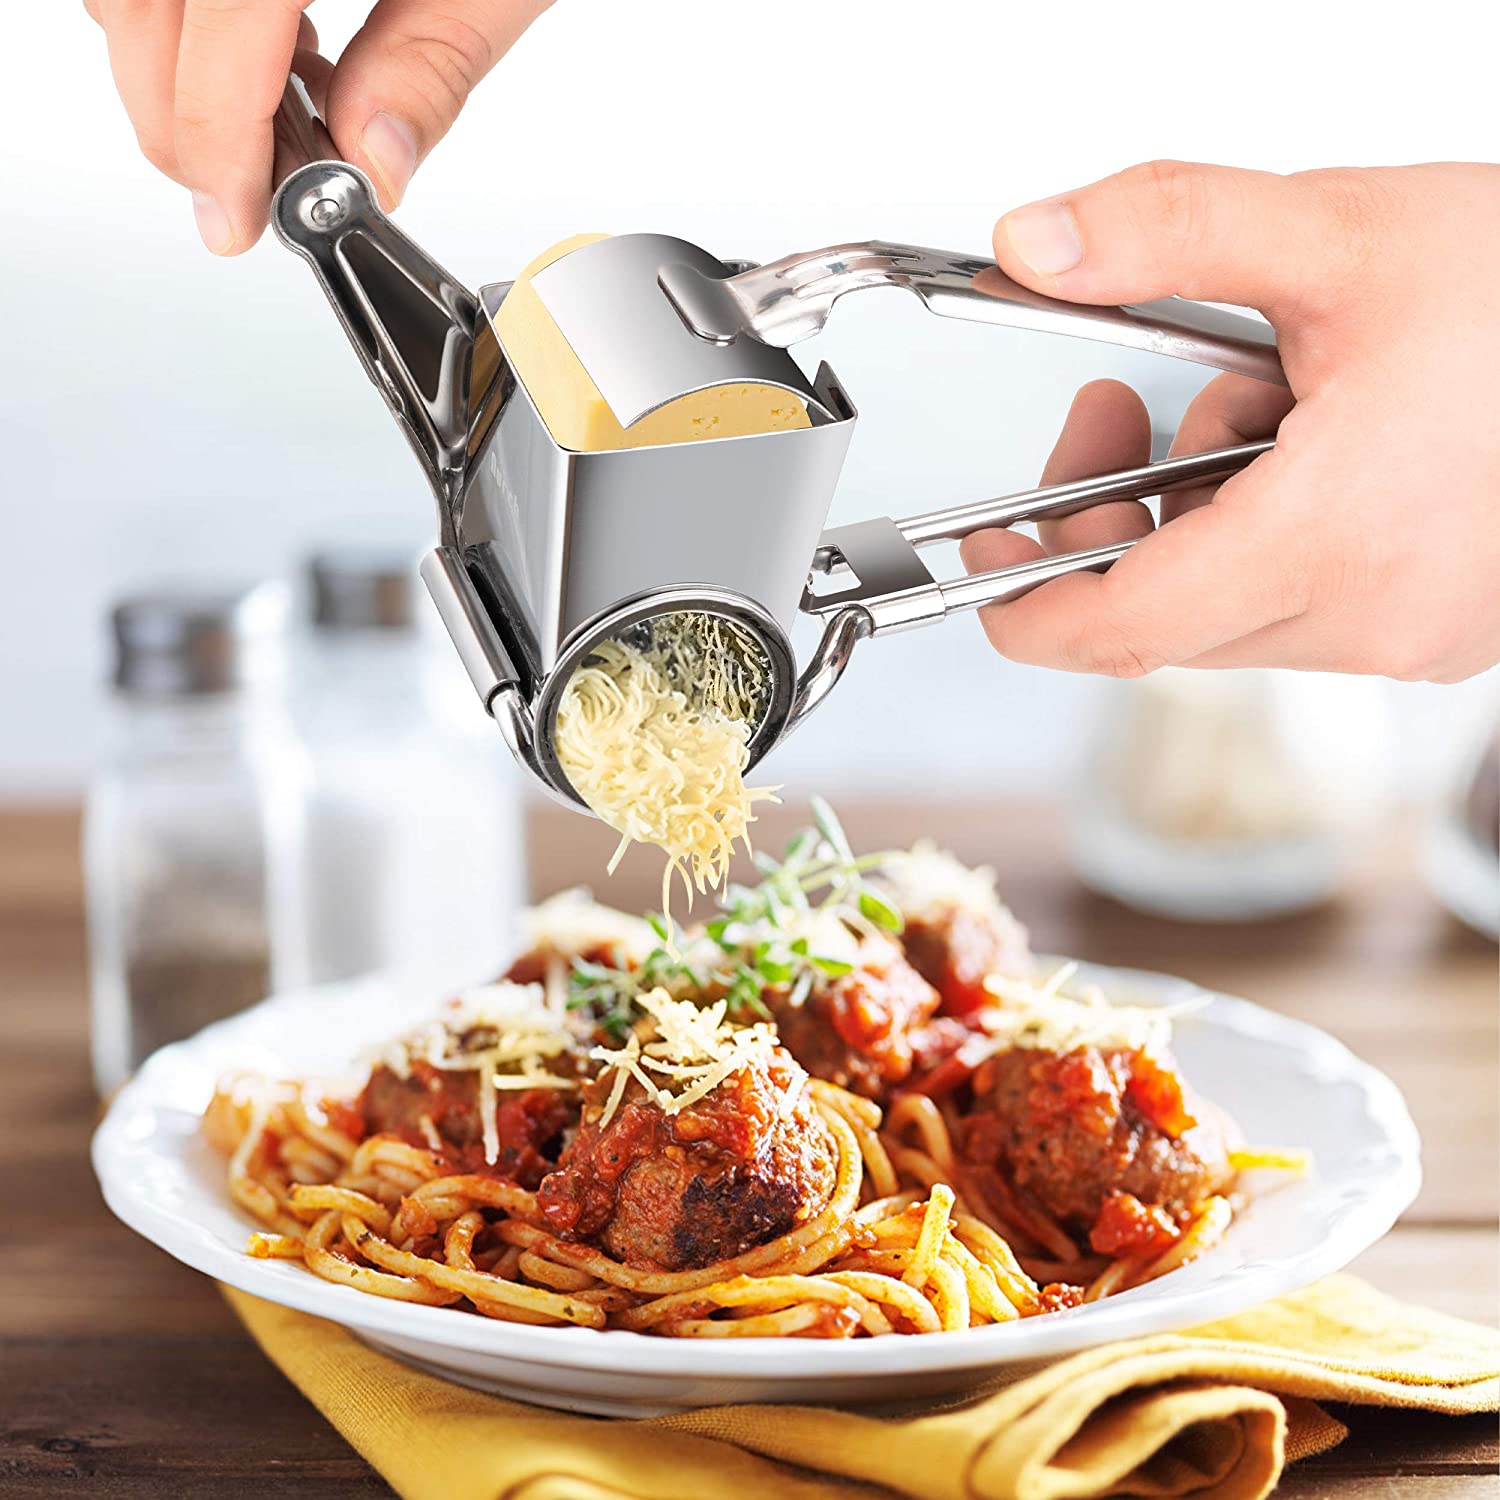 Vivaant Professional-Grade Rotary Grater - 2 Stainless Steel Drums